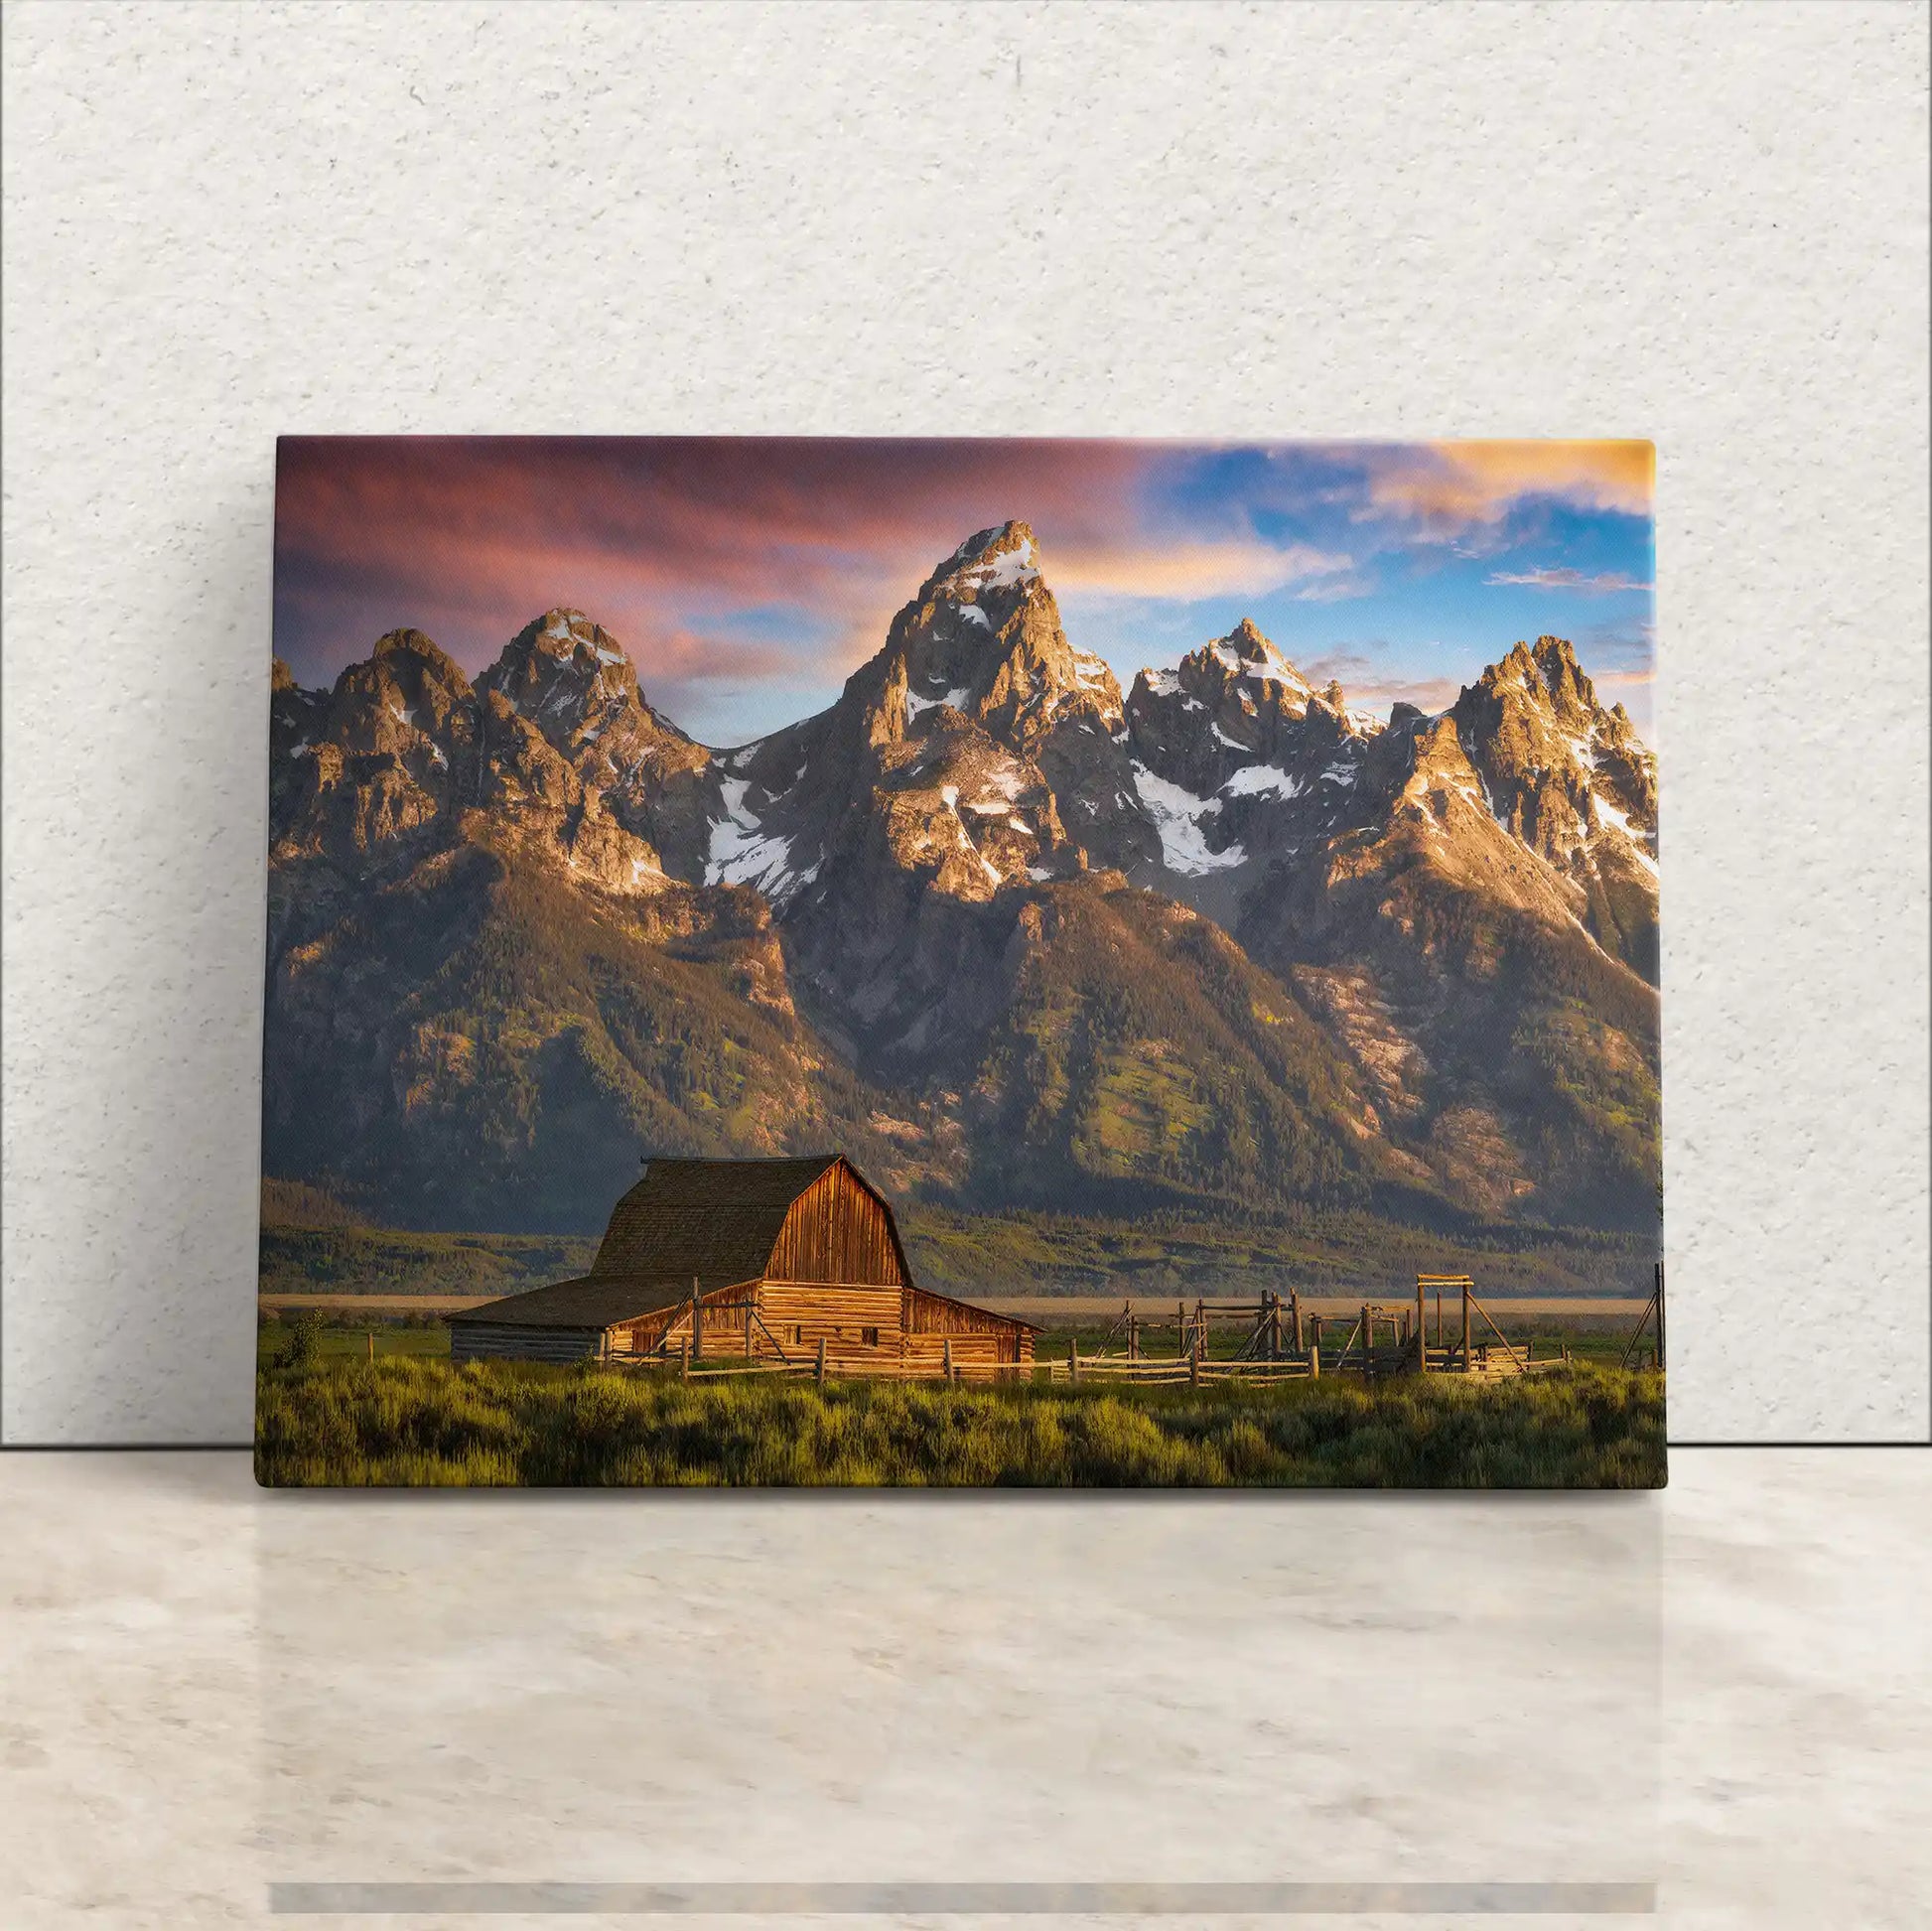 A canvas print leaning against a white wall, depicting the John Moulton Homestead with the Teton Mountains in the background, bathed in the warm light of sunrise.